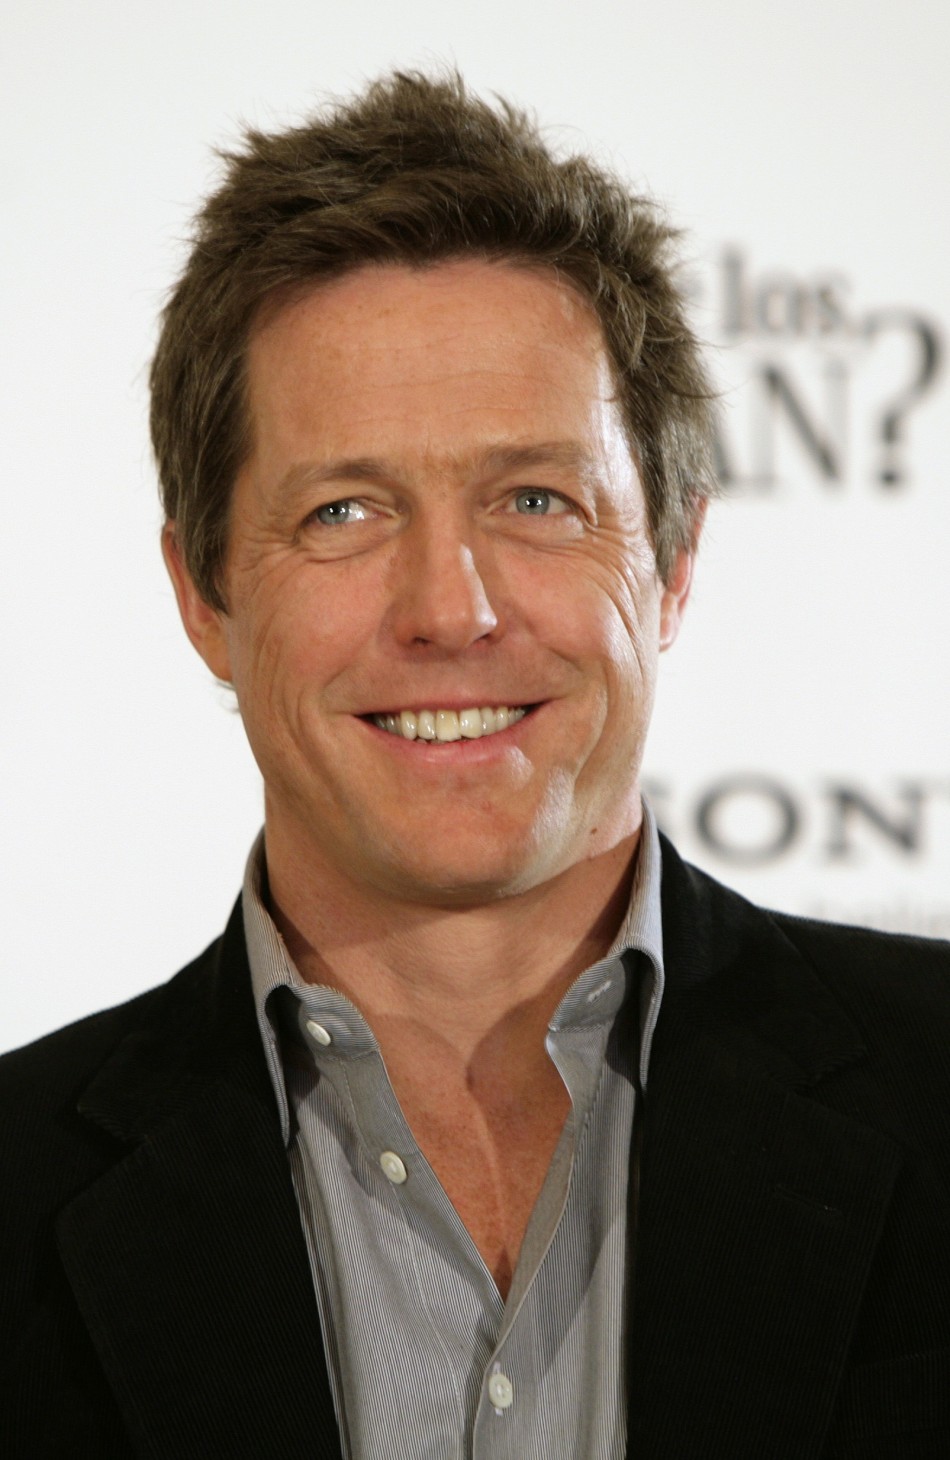 The actor Hugh Grant has become a father for the first time at the age of 51